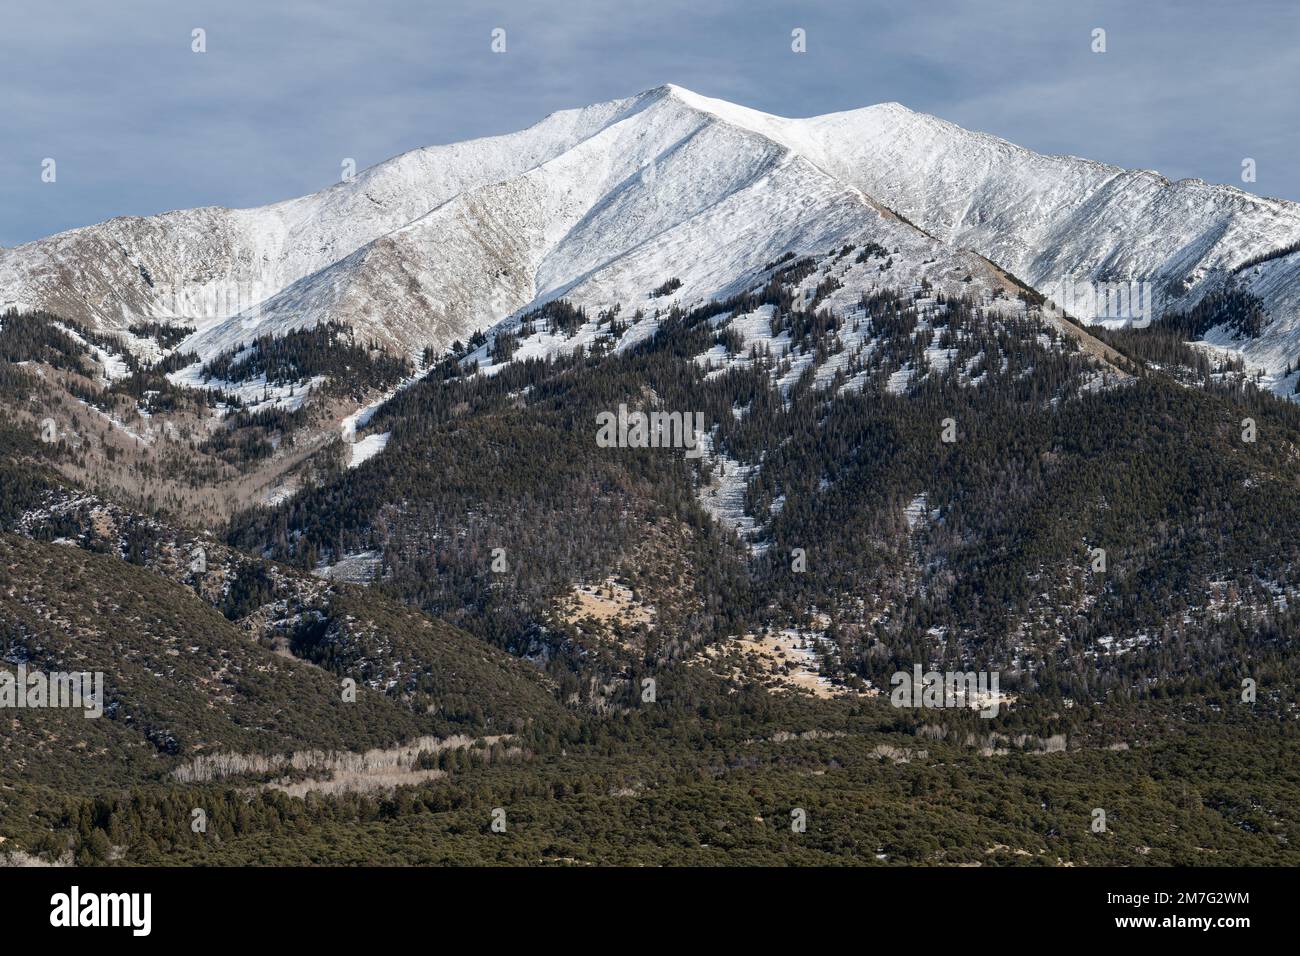 13,580 Foot Twin Peaks viewed from the San Luis Valley. Twin Peaks is part of the Sangre de Cristo Range south of the Great Sand Dunes National Park. Stock Photo